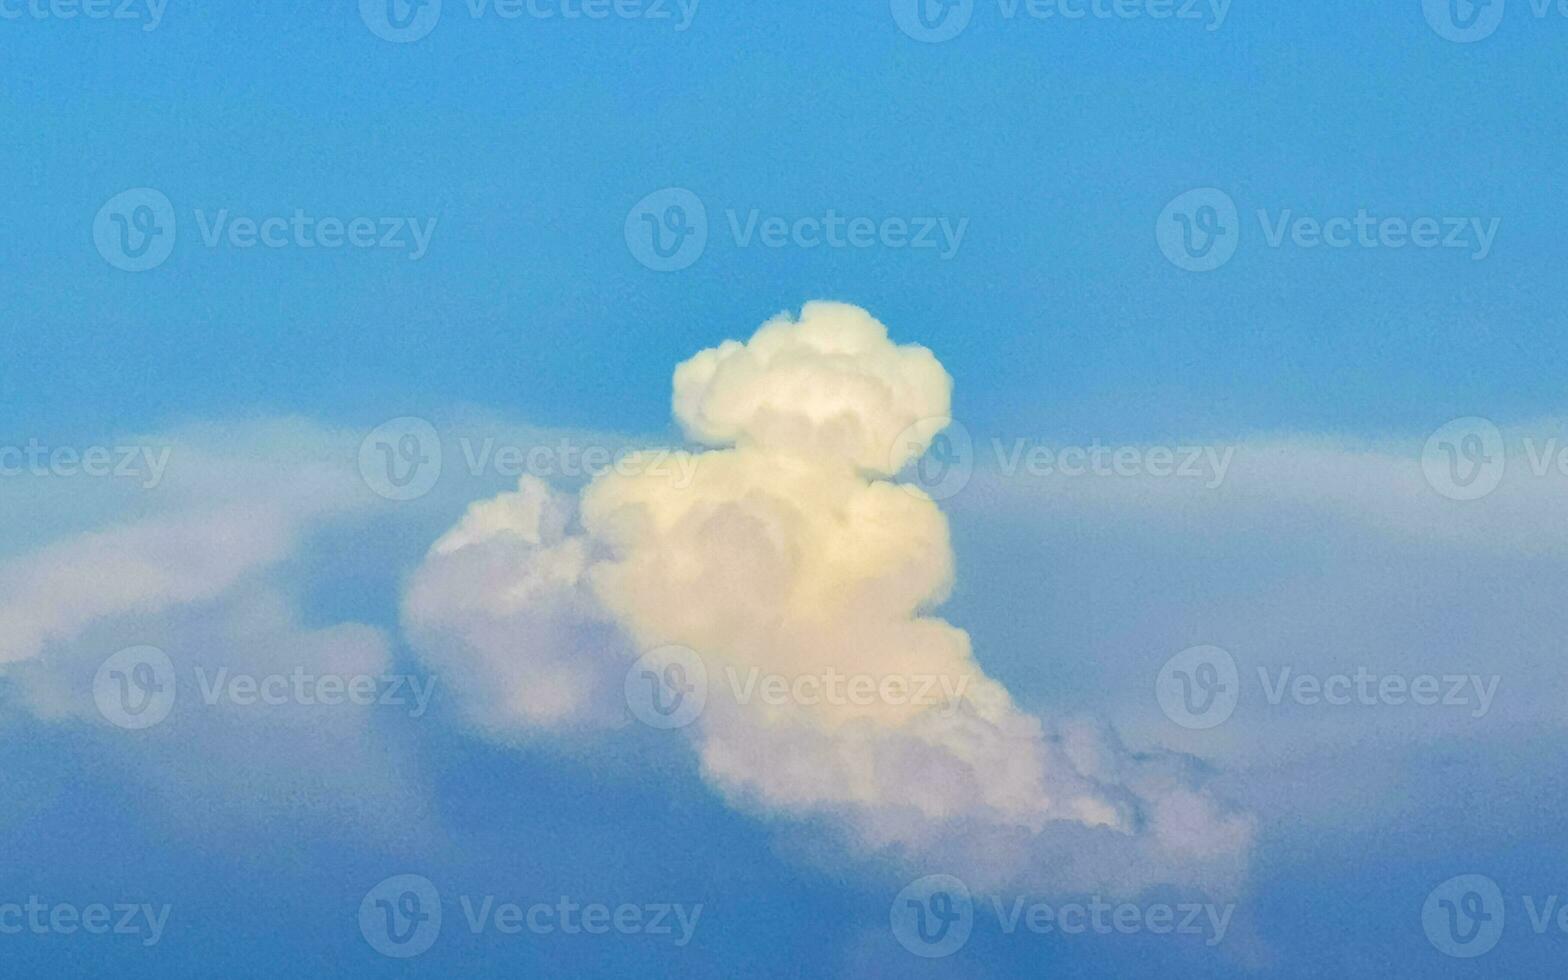 Explosive cloud formation cumulus clouds in the sky in Mexico. photo